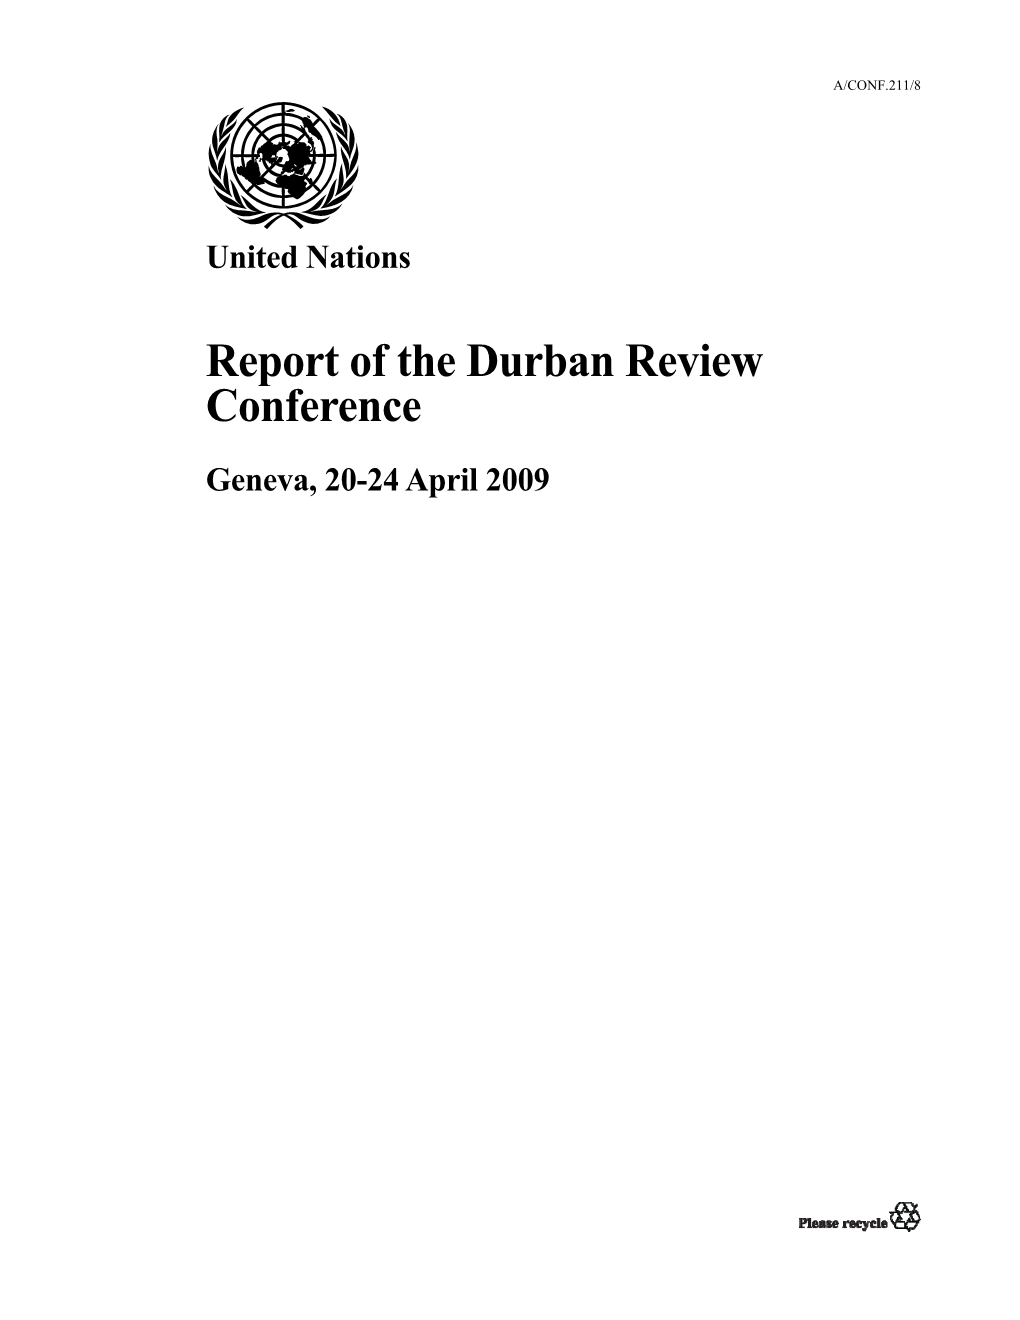 Report of the Durban Review Conference